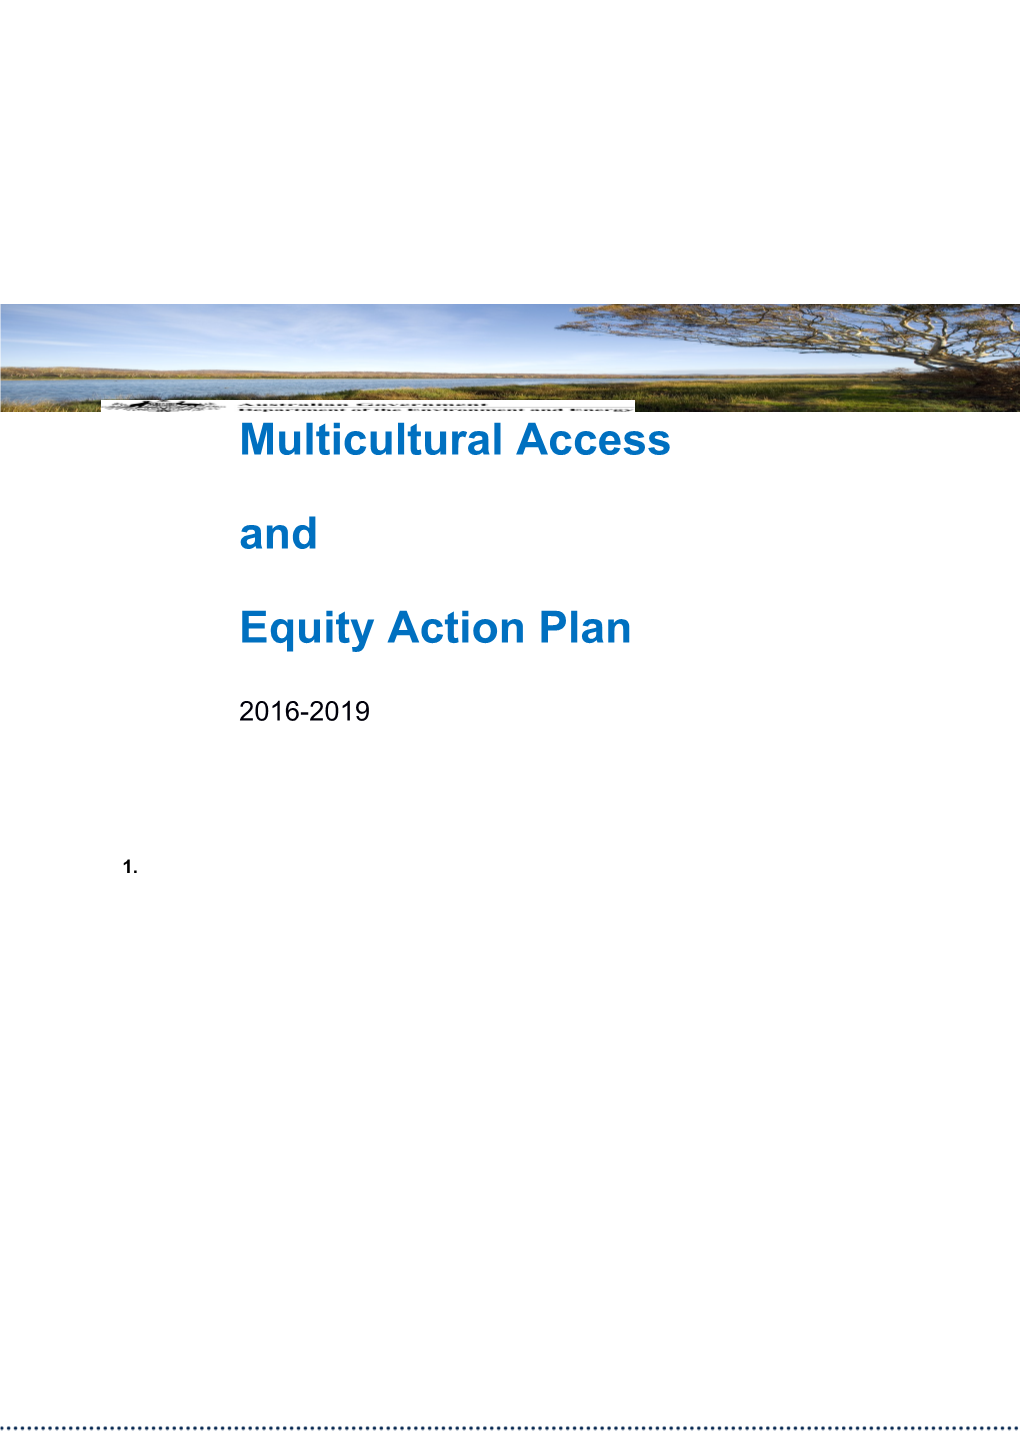 Multicultural Access and Equity Action Plan 2016-2019